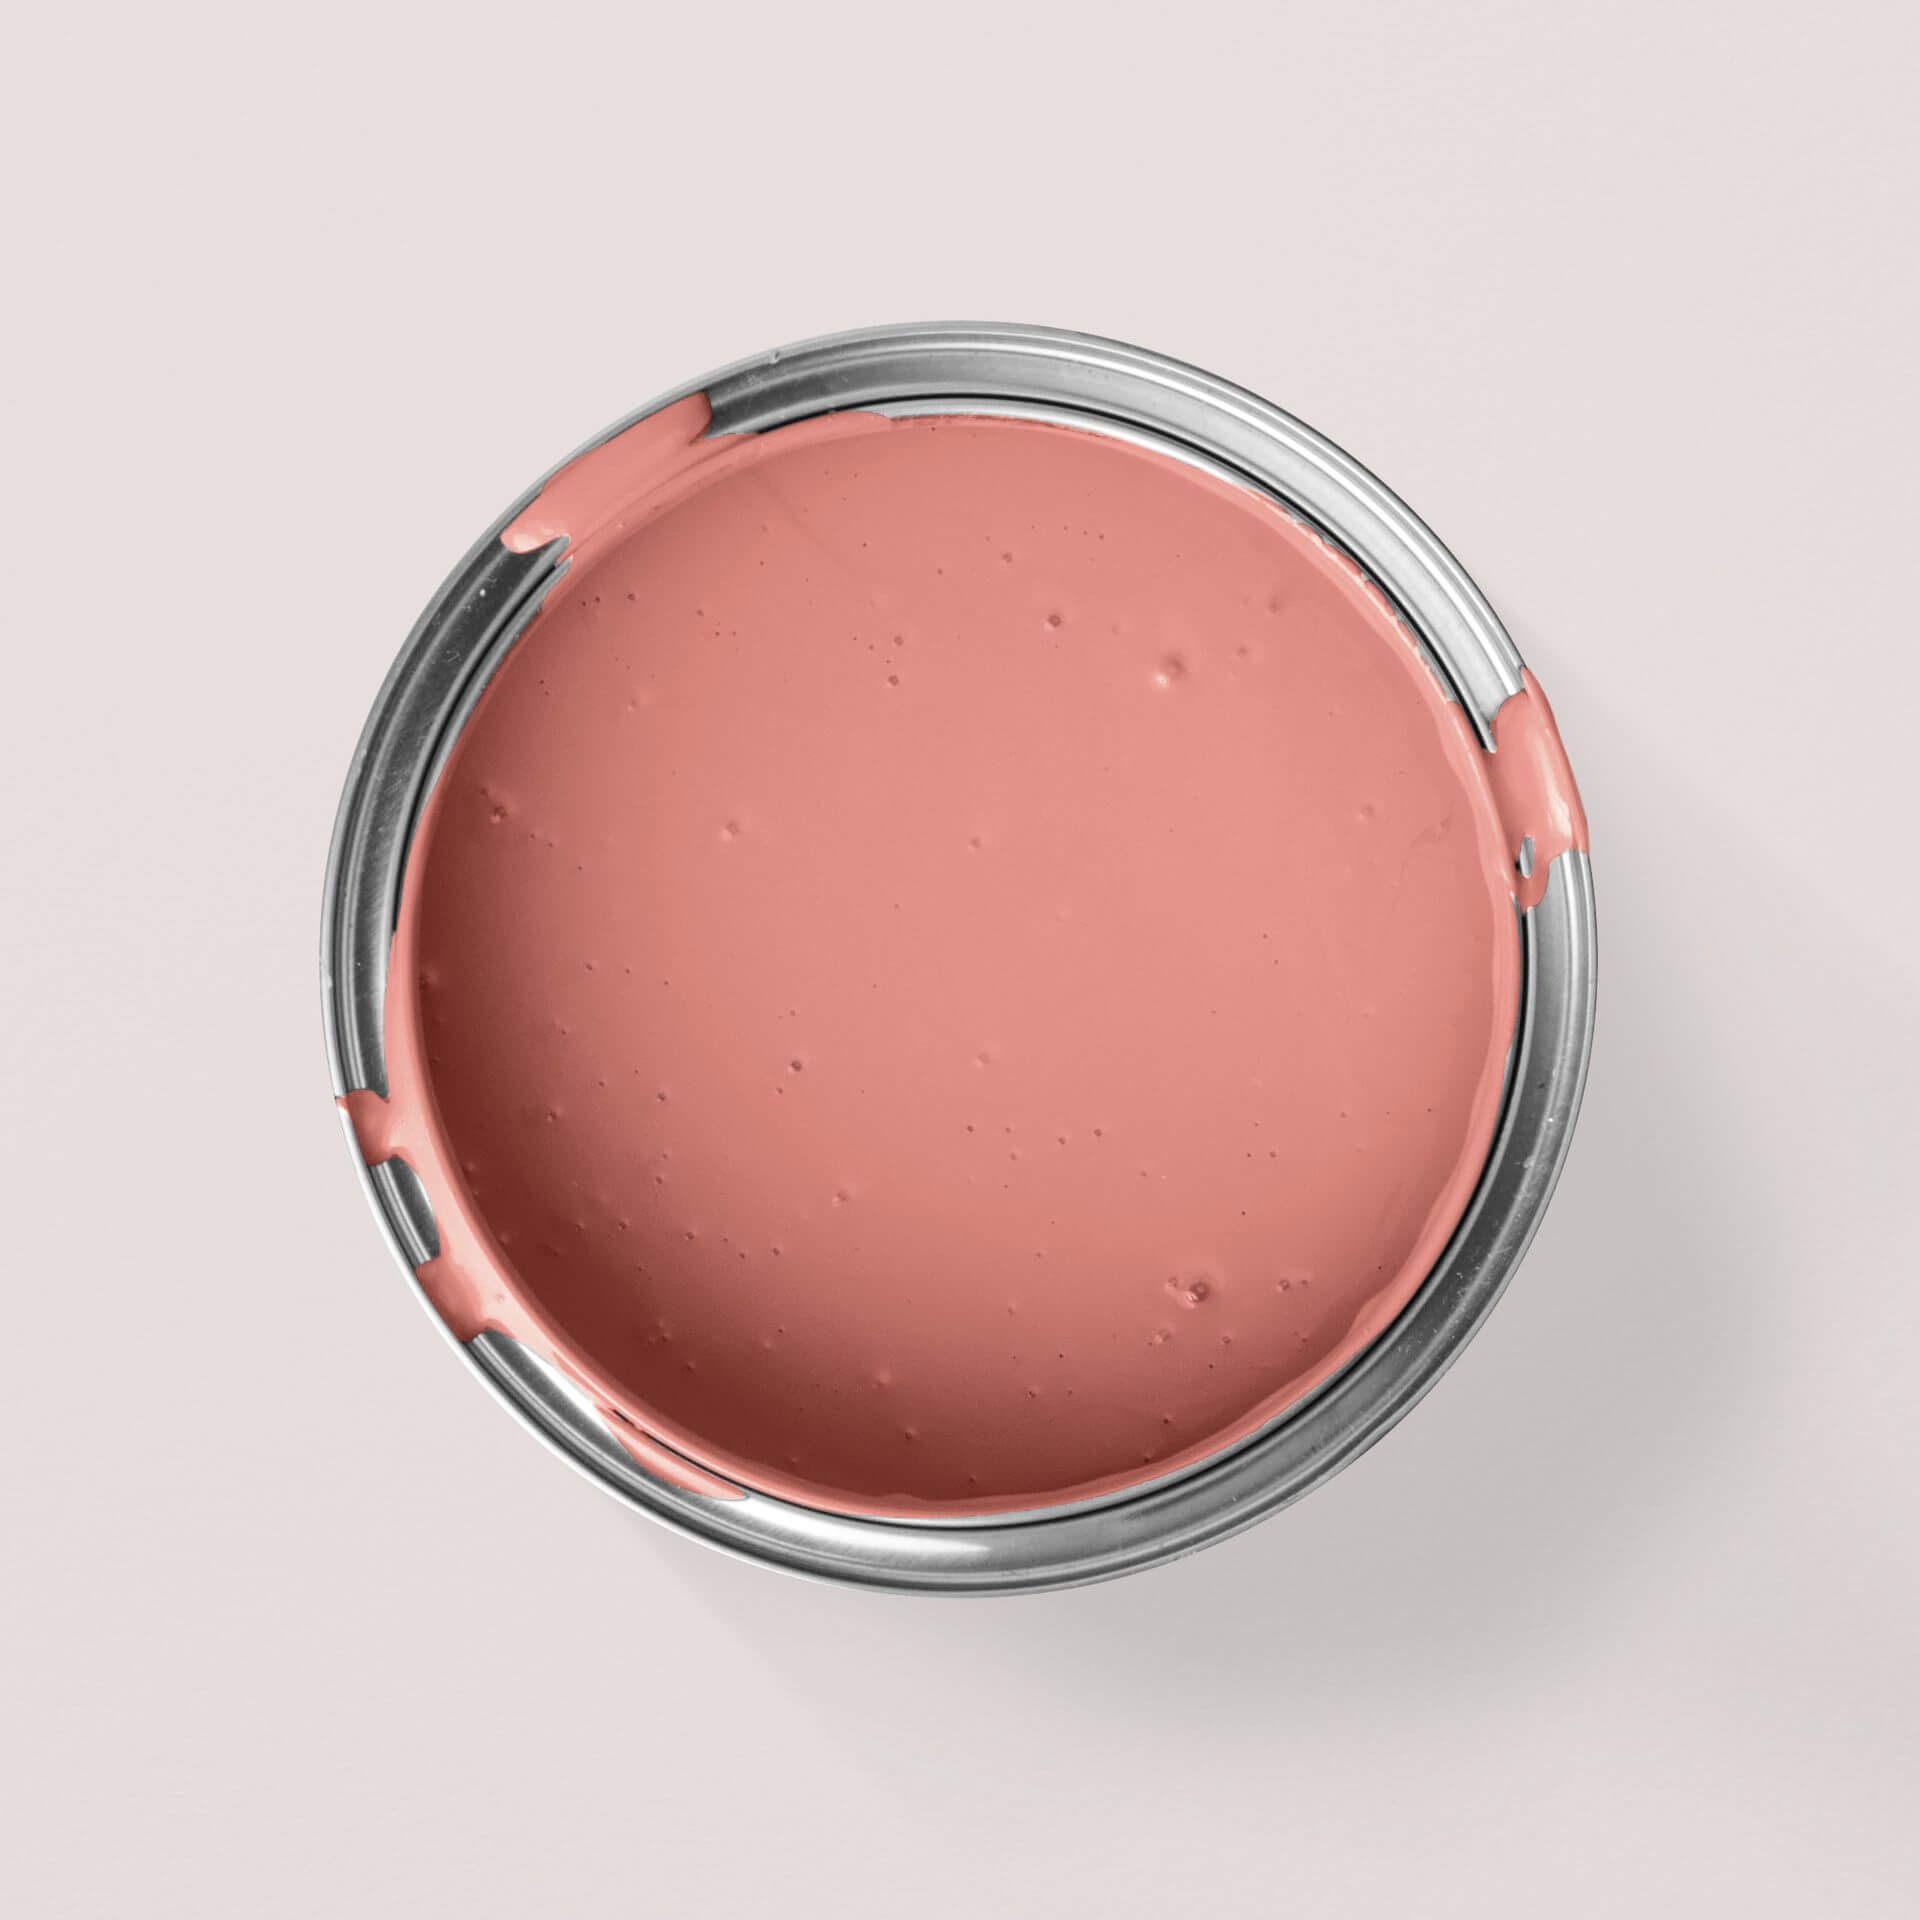 MissPompadour Red with Coral - The Valuable Wall Paint 2. 5L